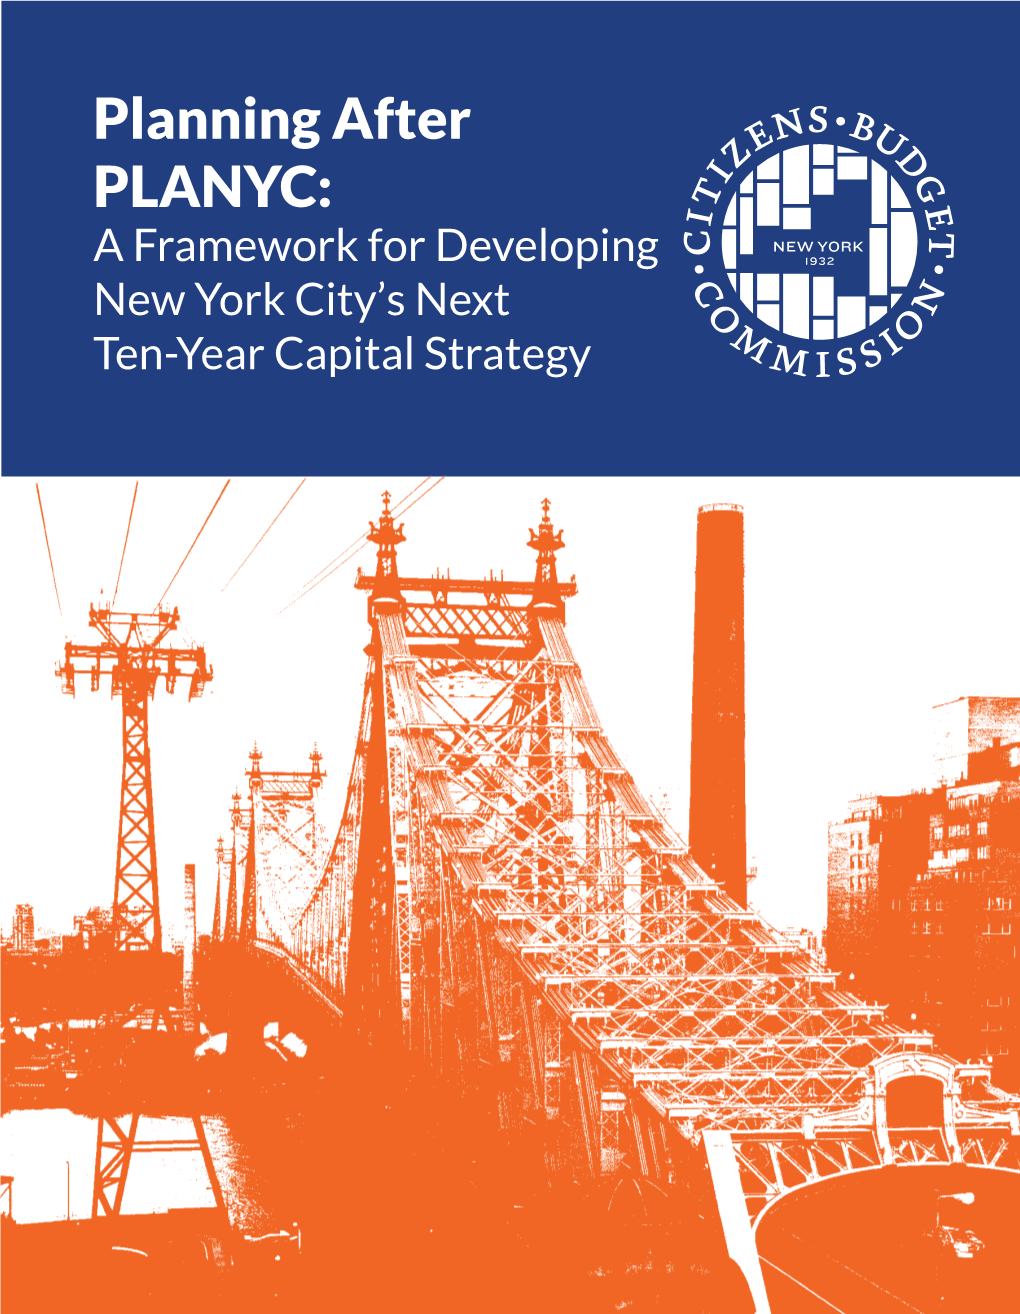 Planning After PLANYC:A Framework for Developing New York City's Next Ten-Year Capital Strategy